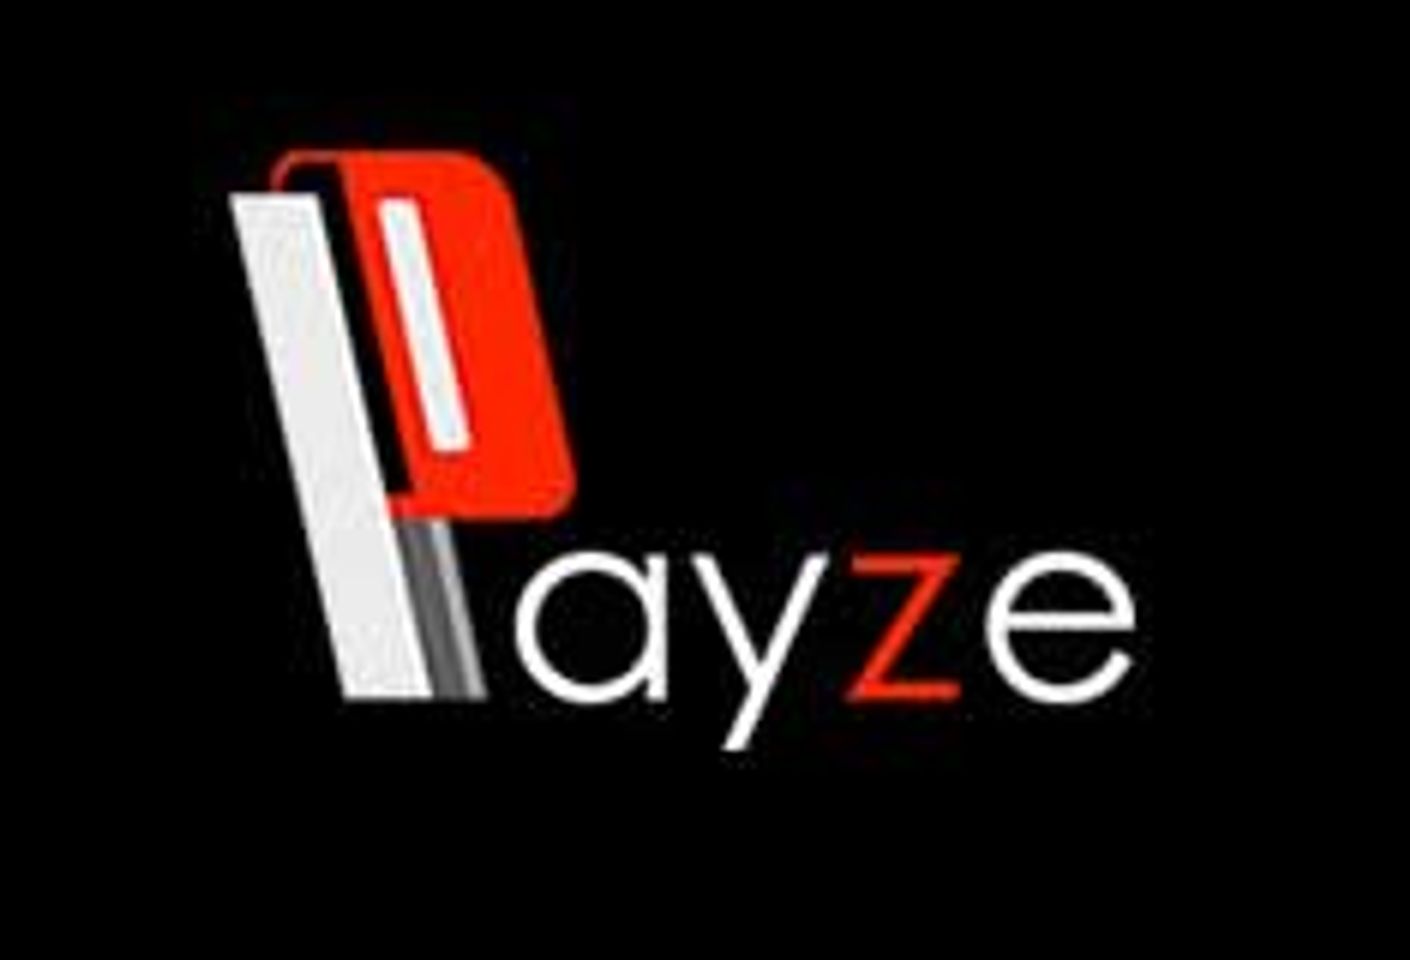 Chris Rodger Joins Payze.com as Director of Sales